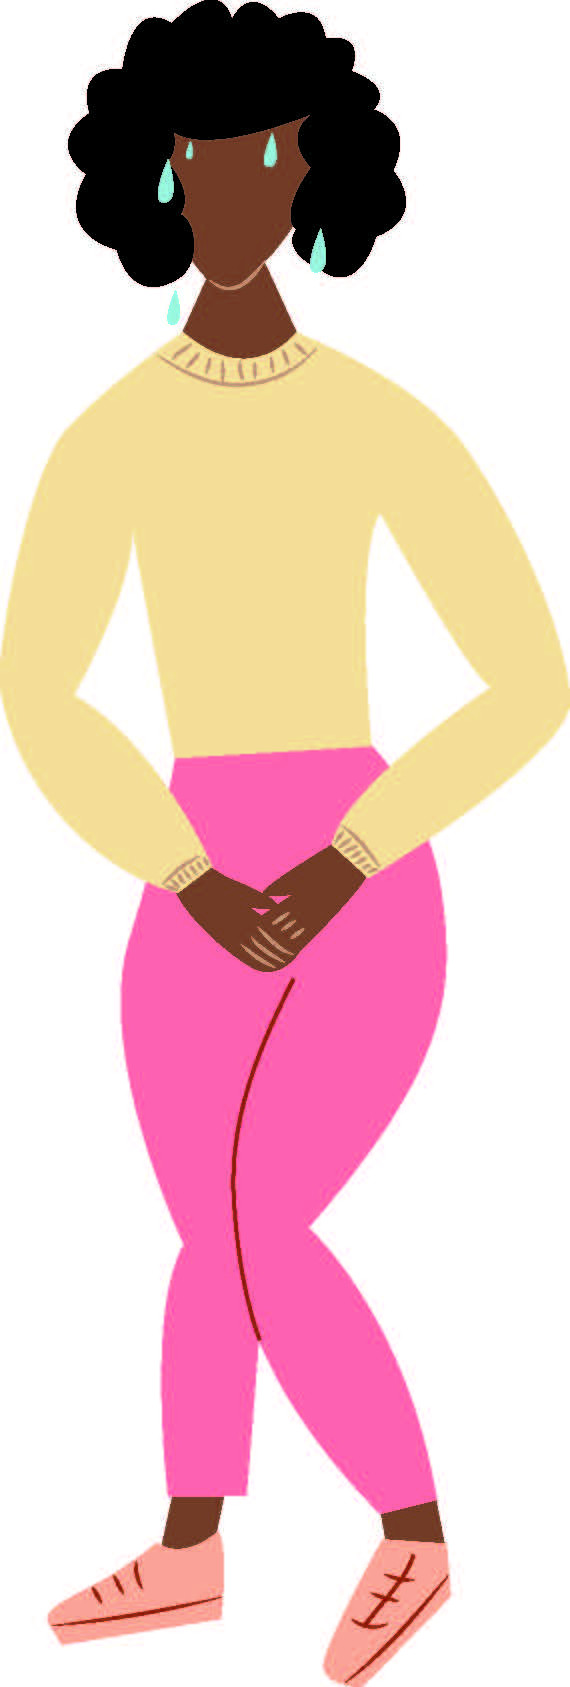 illustration of a woman holding her legs together and her hands in front of her pelvic area, having bladder discomfort